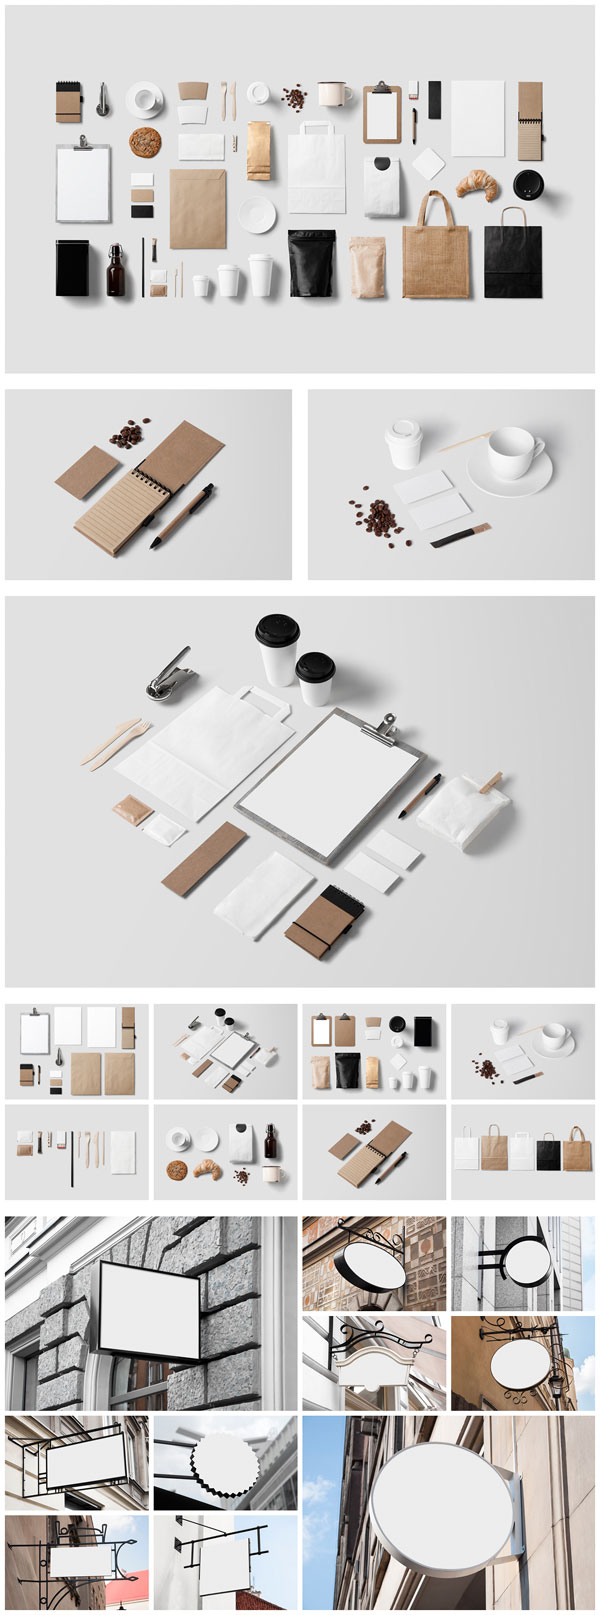 Coffee stationery mockup as well as 10 sign mockups.